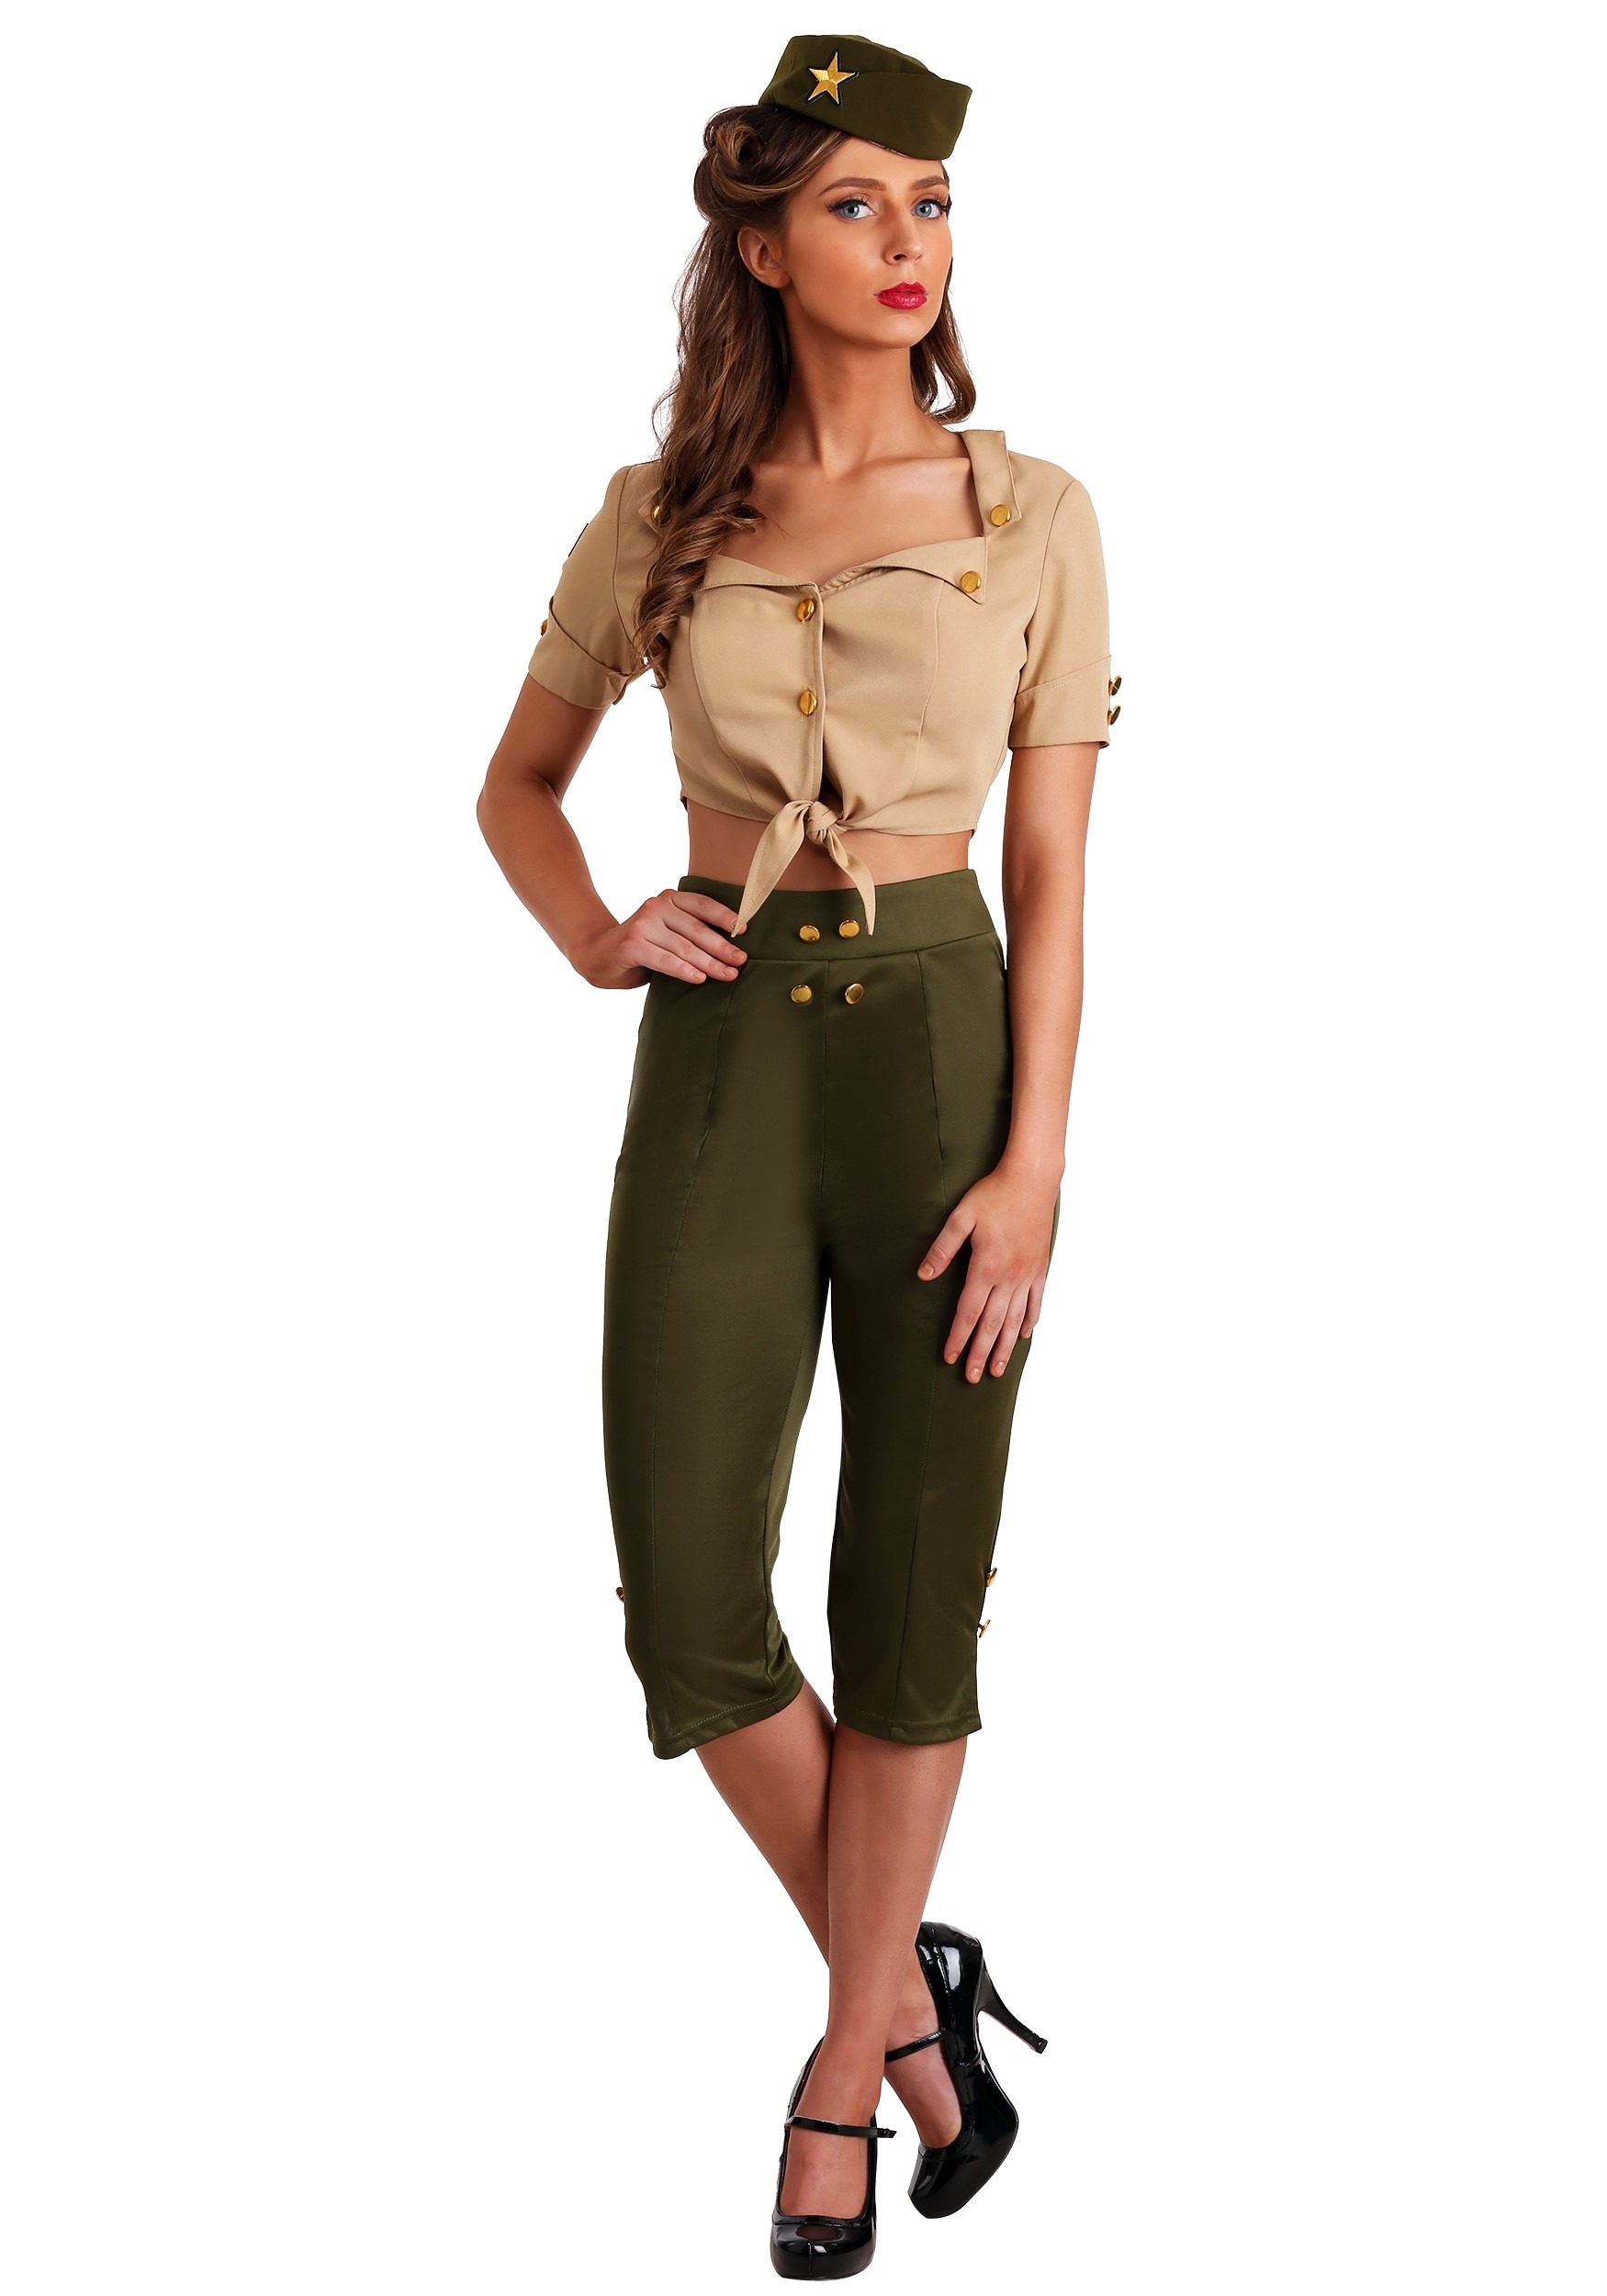 Military Lady Dress With Hat: Vintage / Pin-up / Rockabilly / Army Style  Dress With by Ticci Rockabilly Clothing -  Canada